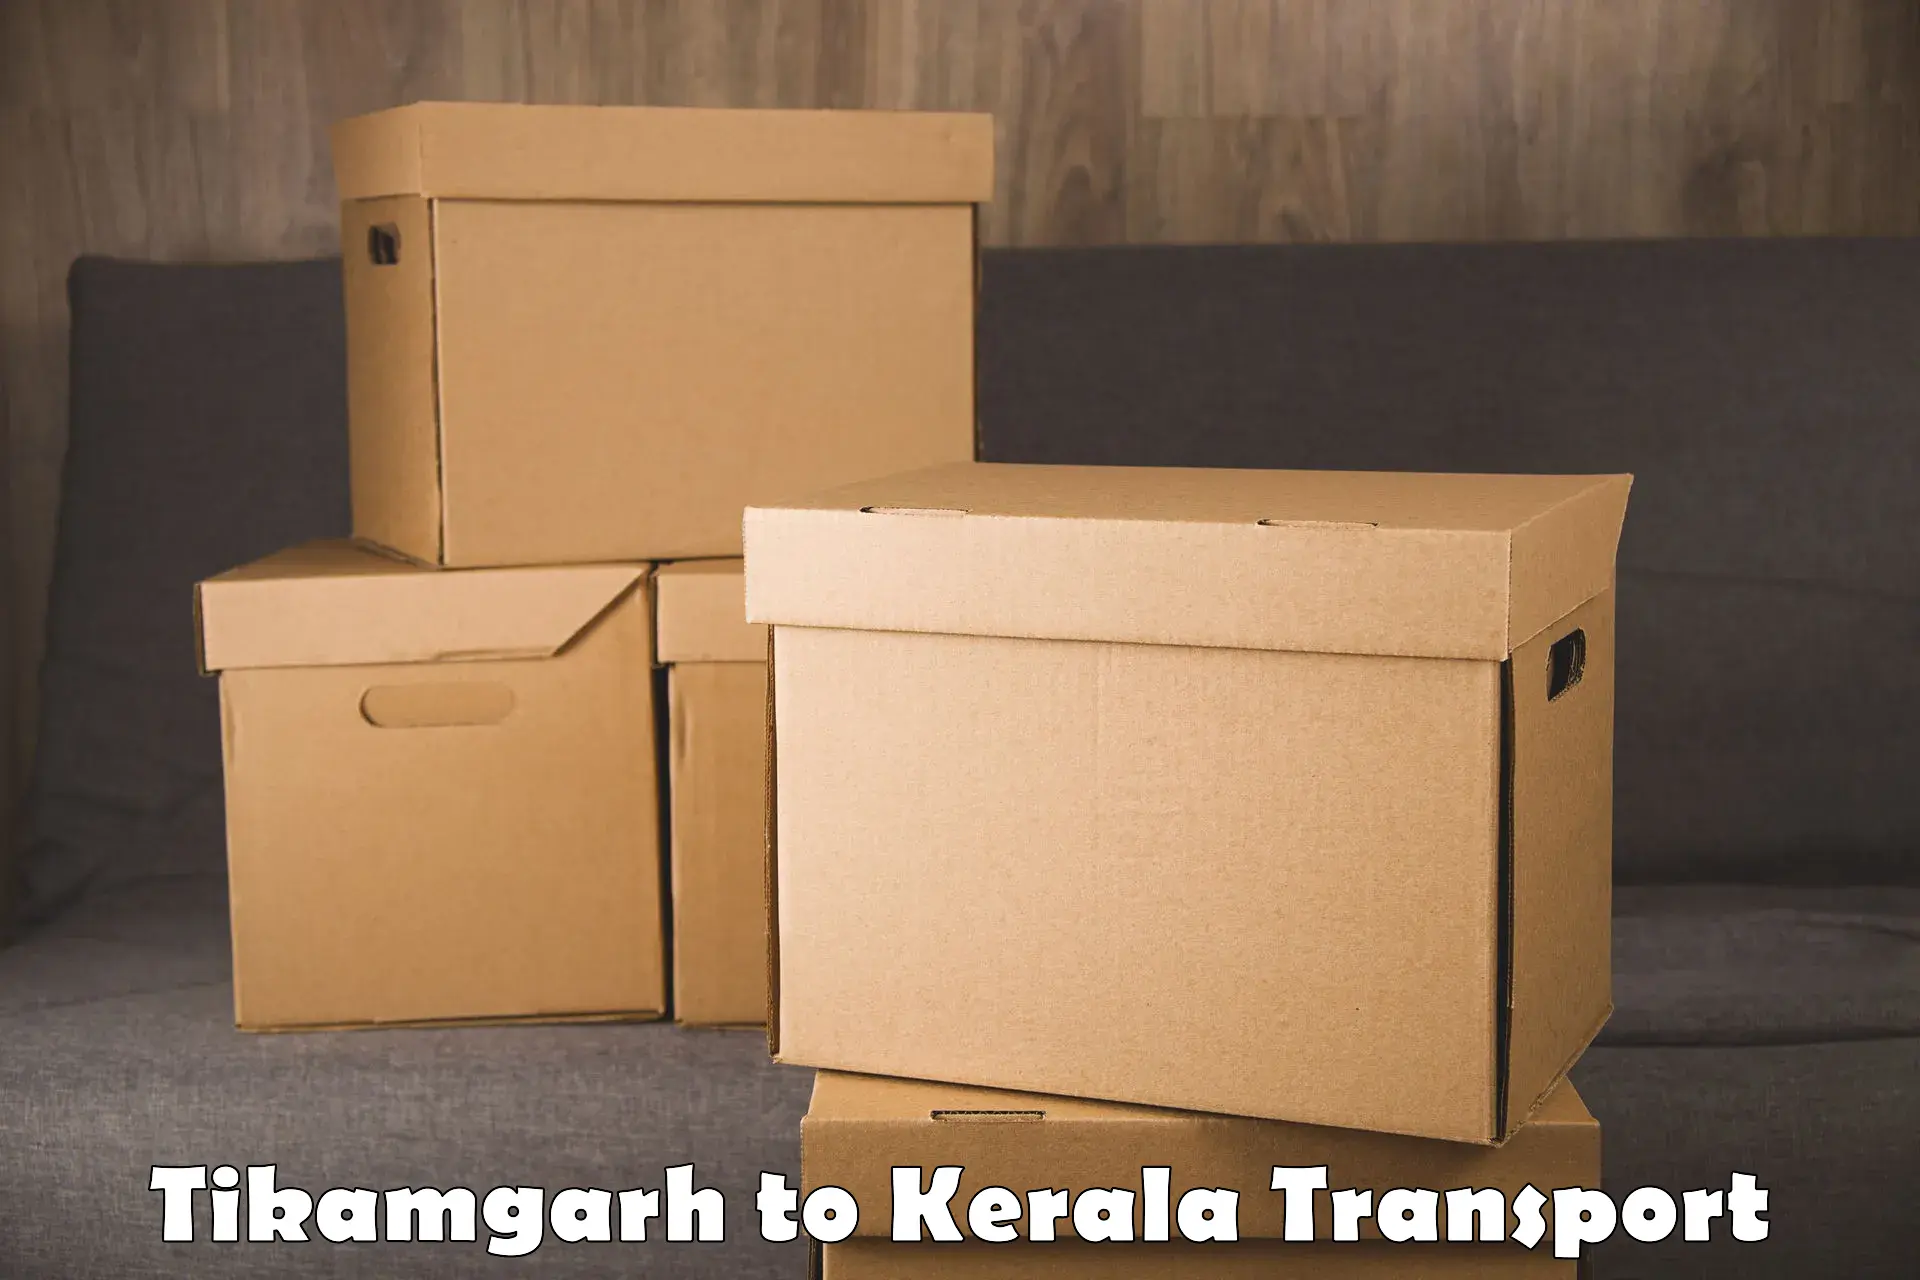 Commercial transport service Tikamgarh to Trivandrum